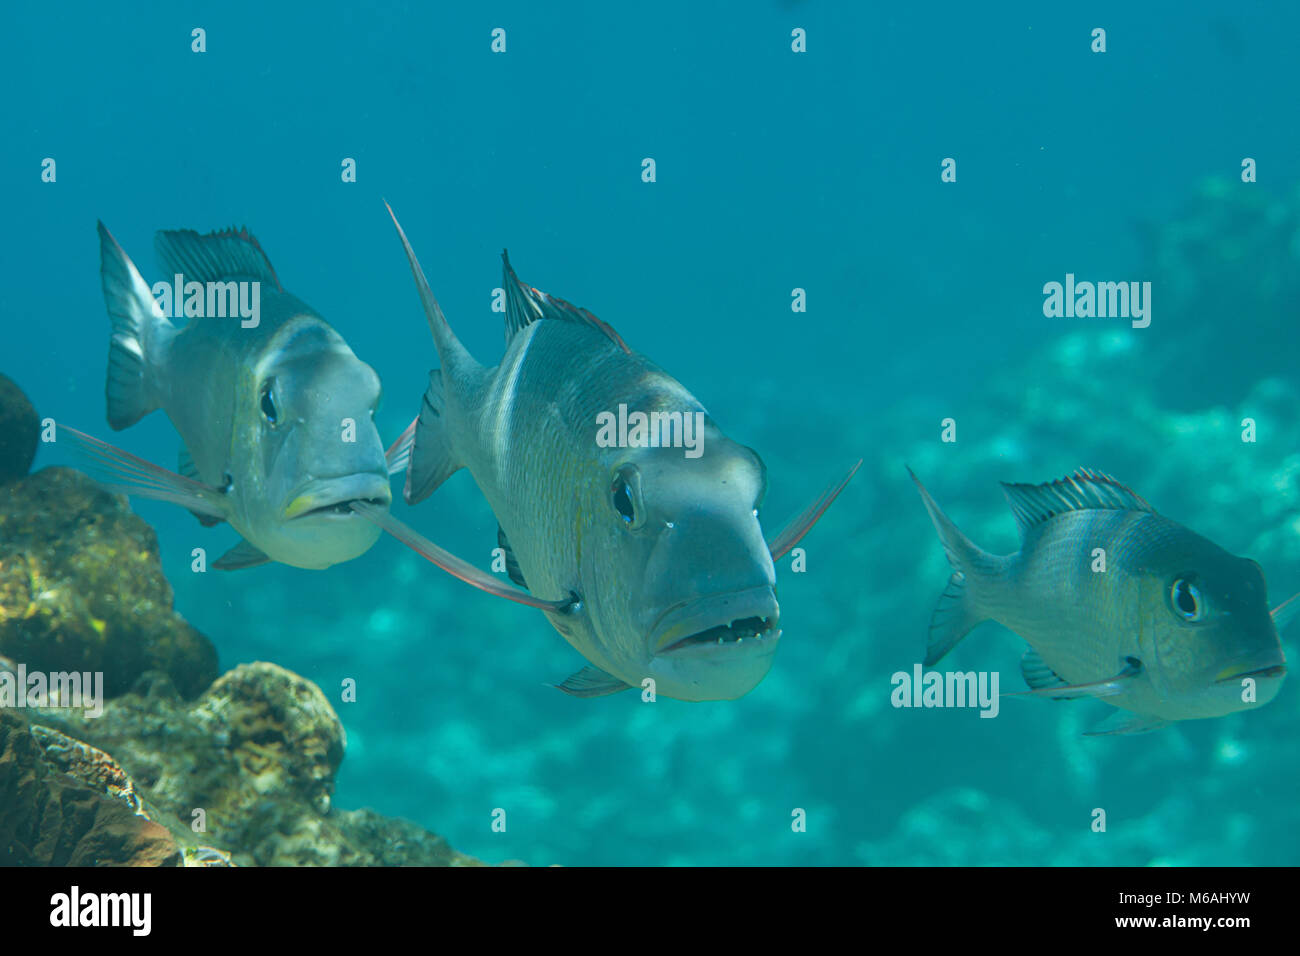 Three Humpnose big-eye bream (Monotaxis grandoculis) are looking at me, Bali, Indonesia Stock Photo